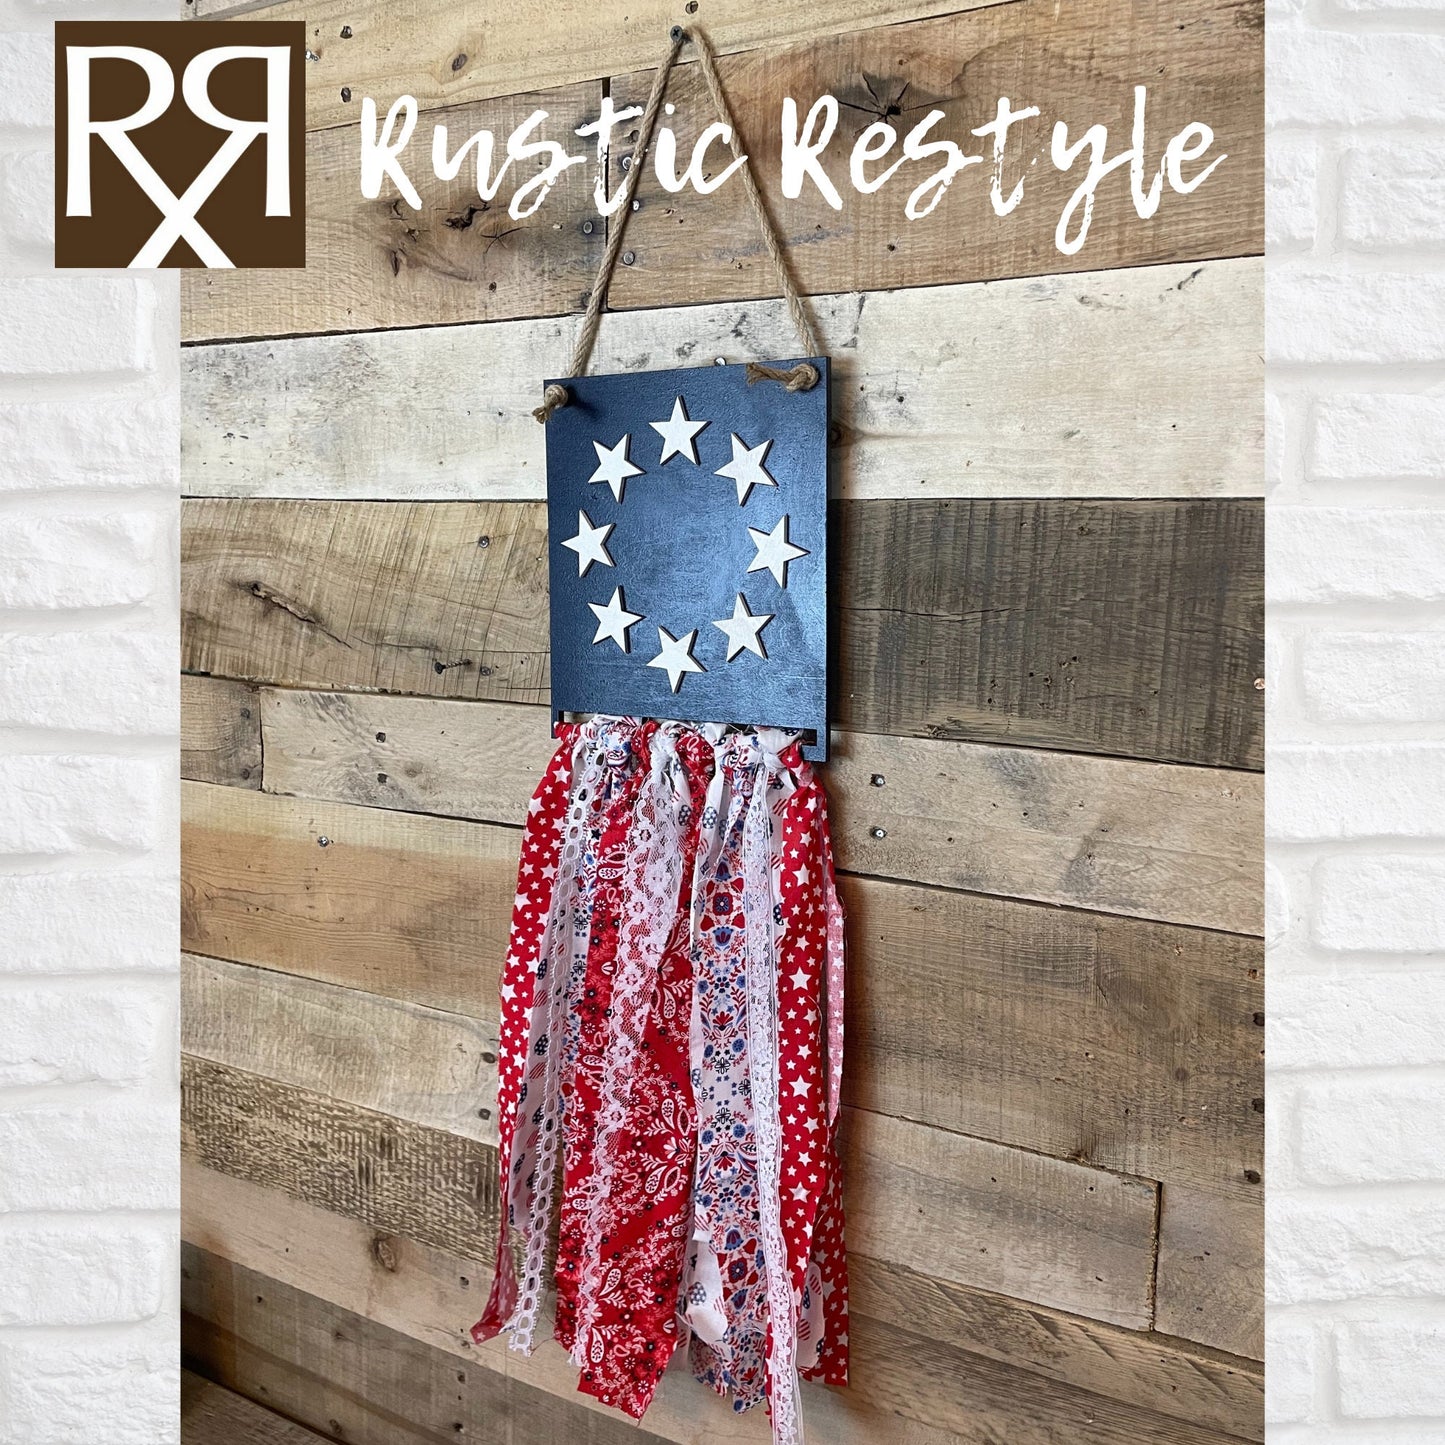 USA Patriotic rag flag, red, white, and Blue American flag door hanger wall decor